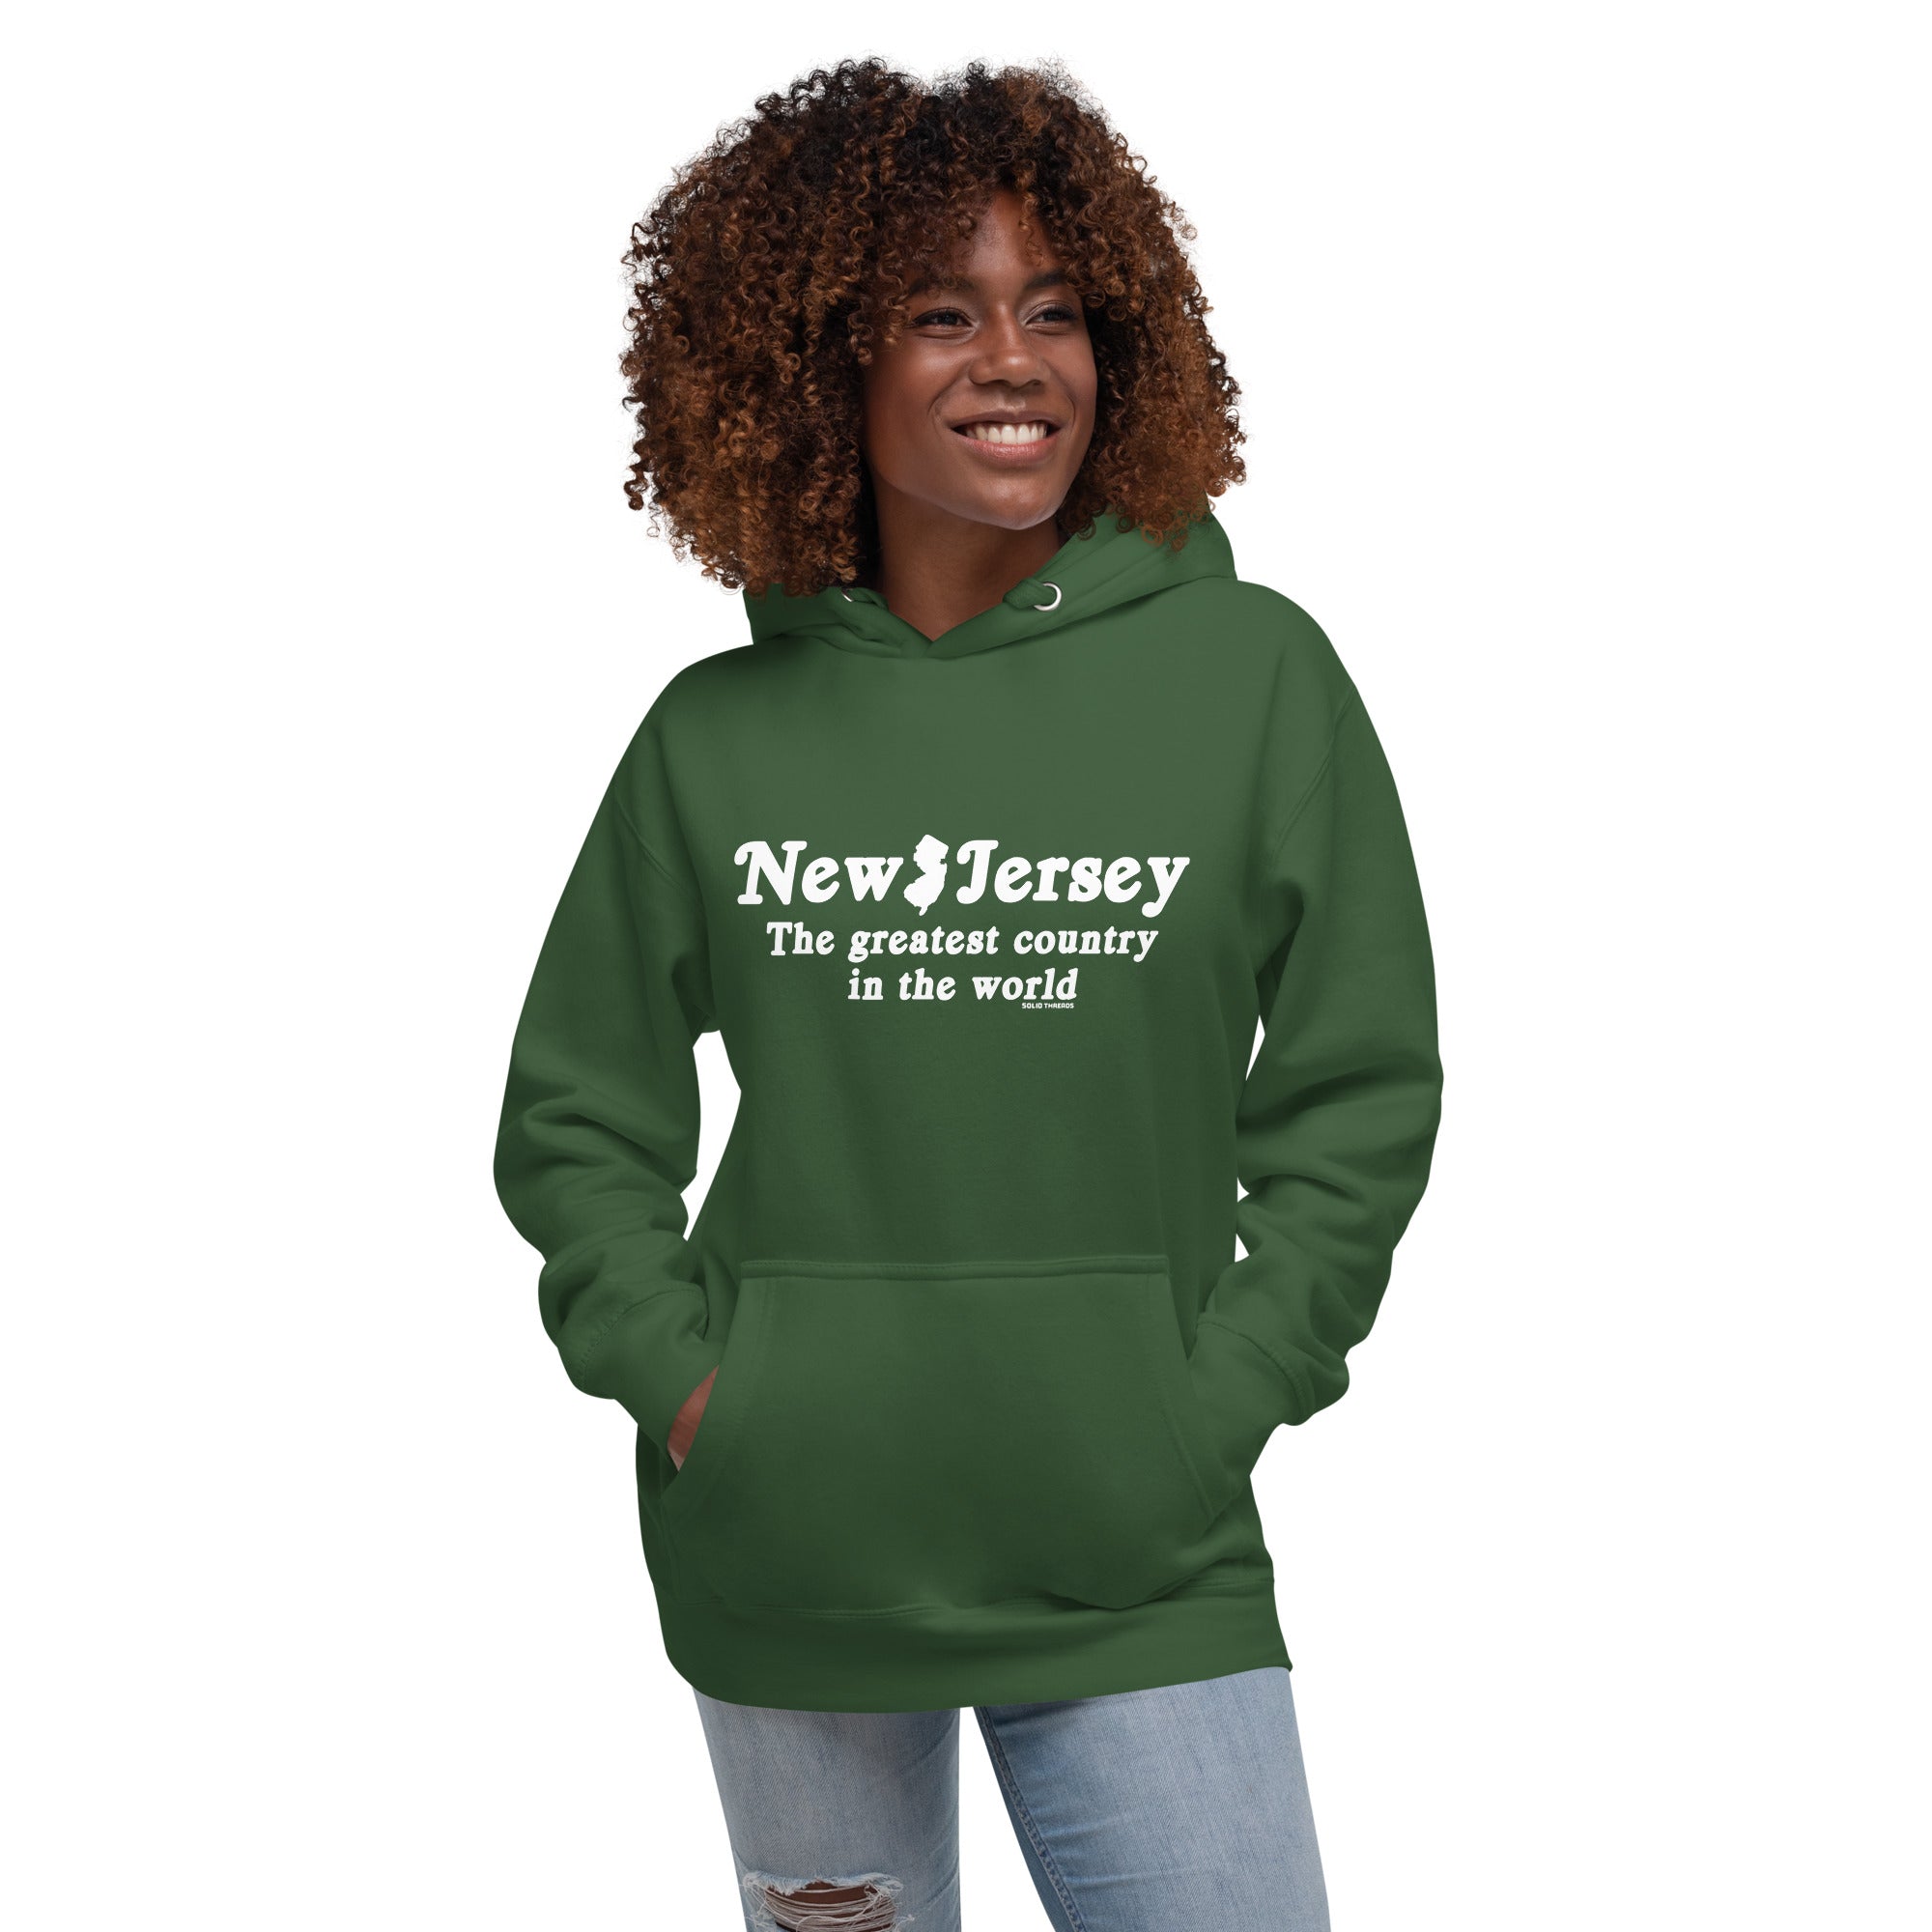 New Jersey The Greatest Country In The World Vintage Classic Pullover Hoodie | Funny Garden State Fleece On Model | Solid Threads